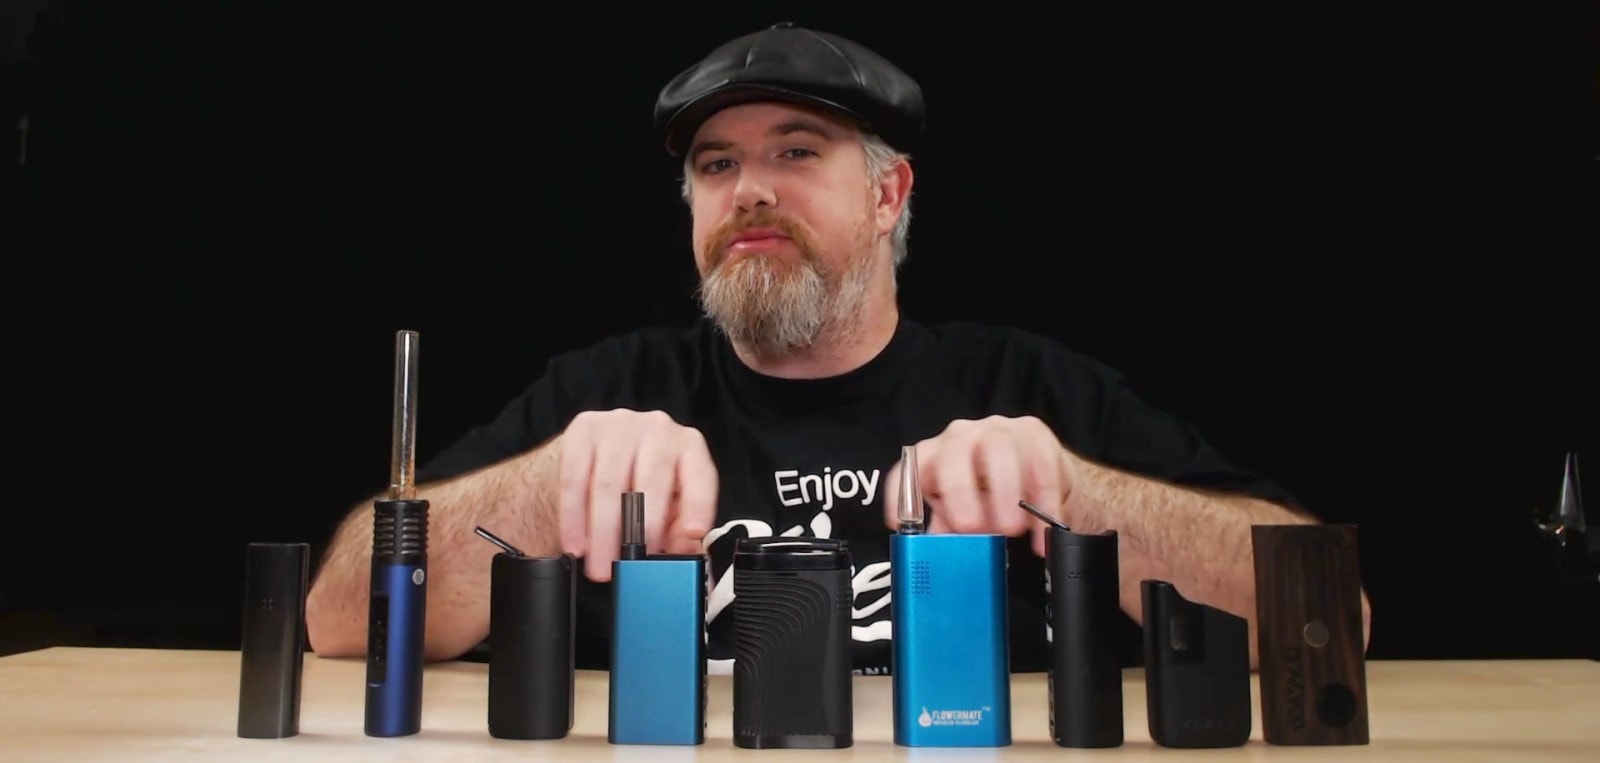 Picture of Troy from 420vapezone reviewing vaporizers